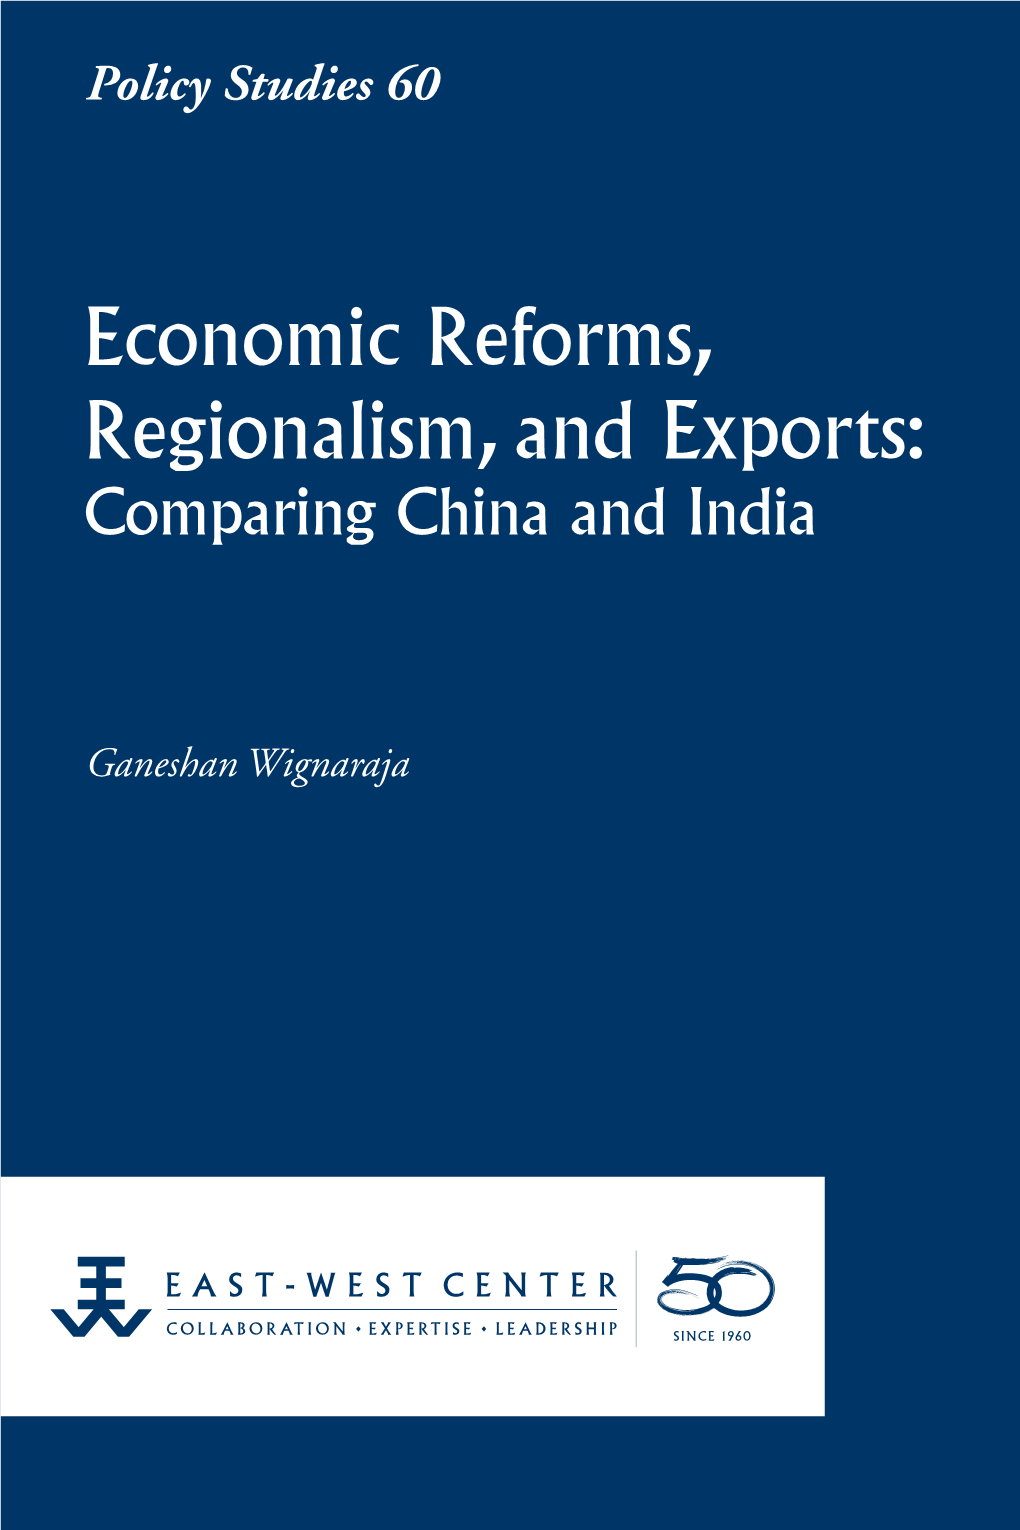 Economic Reforms, Regionalism, and Exports: Comparing China and India